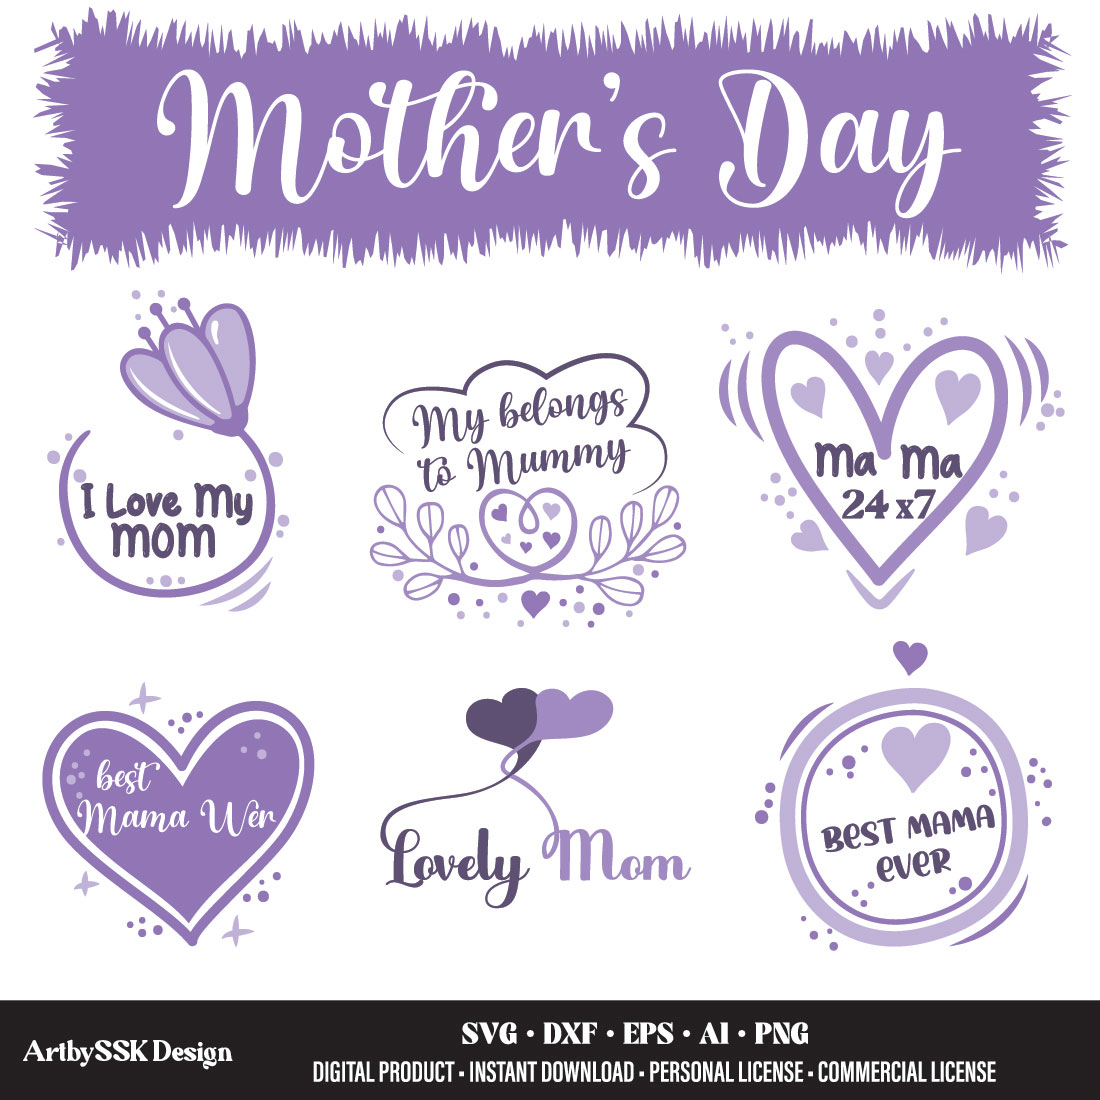 Happy Mother's Day SVG, Mothers Day SVG Bundle Instant Download Full vectors 100% Editable and Scalable CMYK colors Print ready preview image.